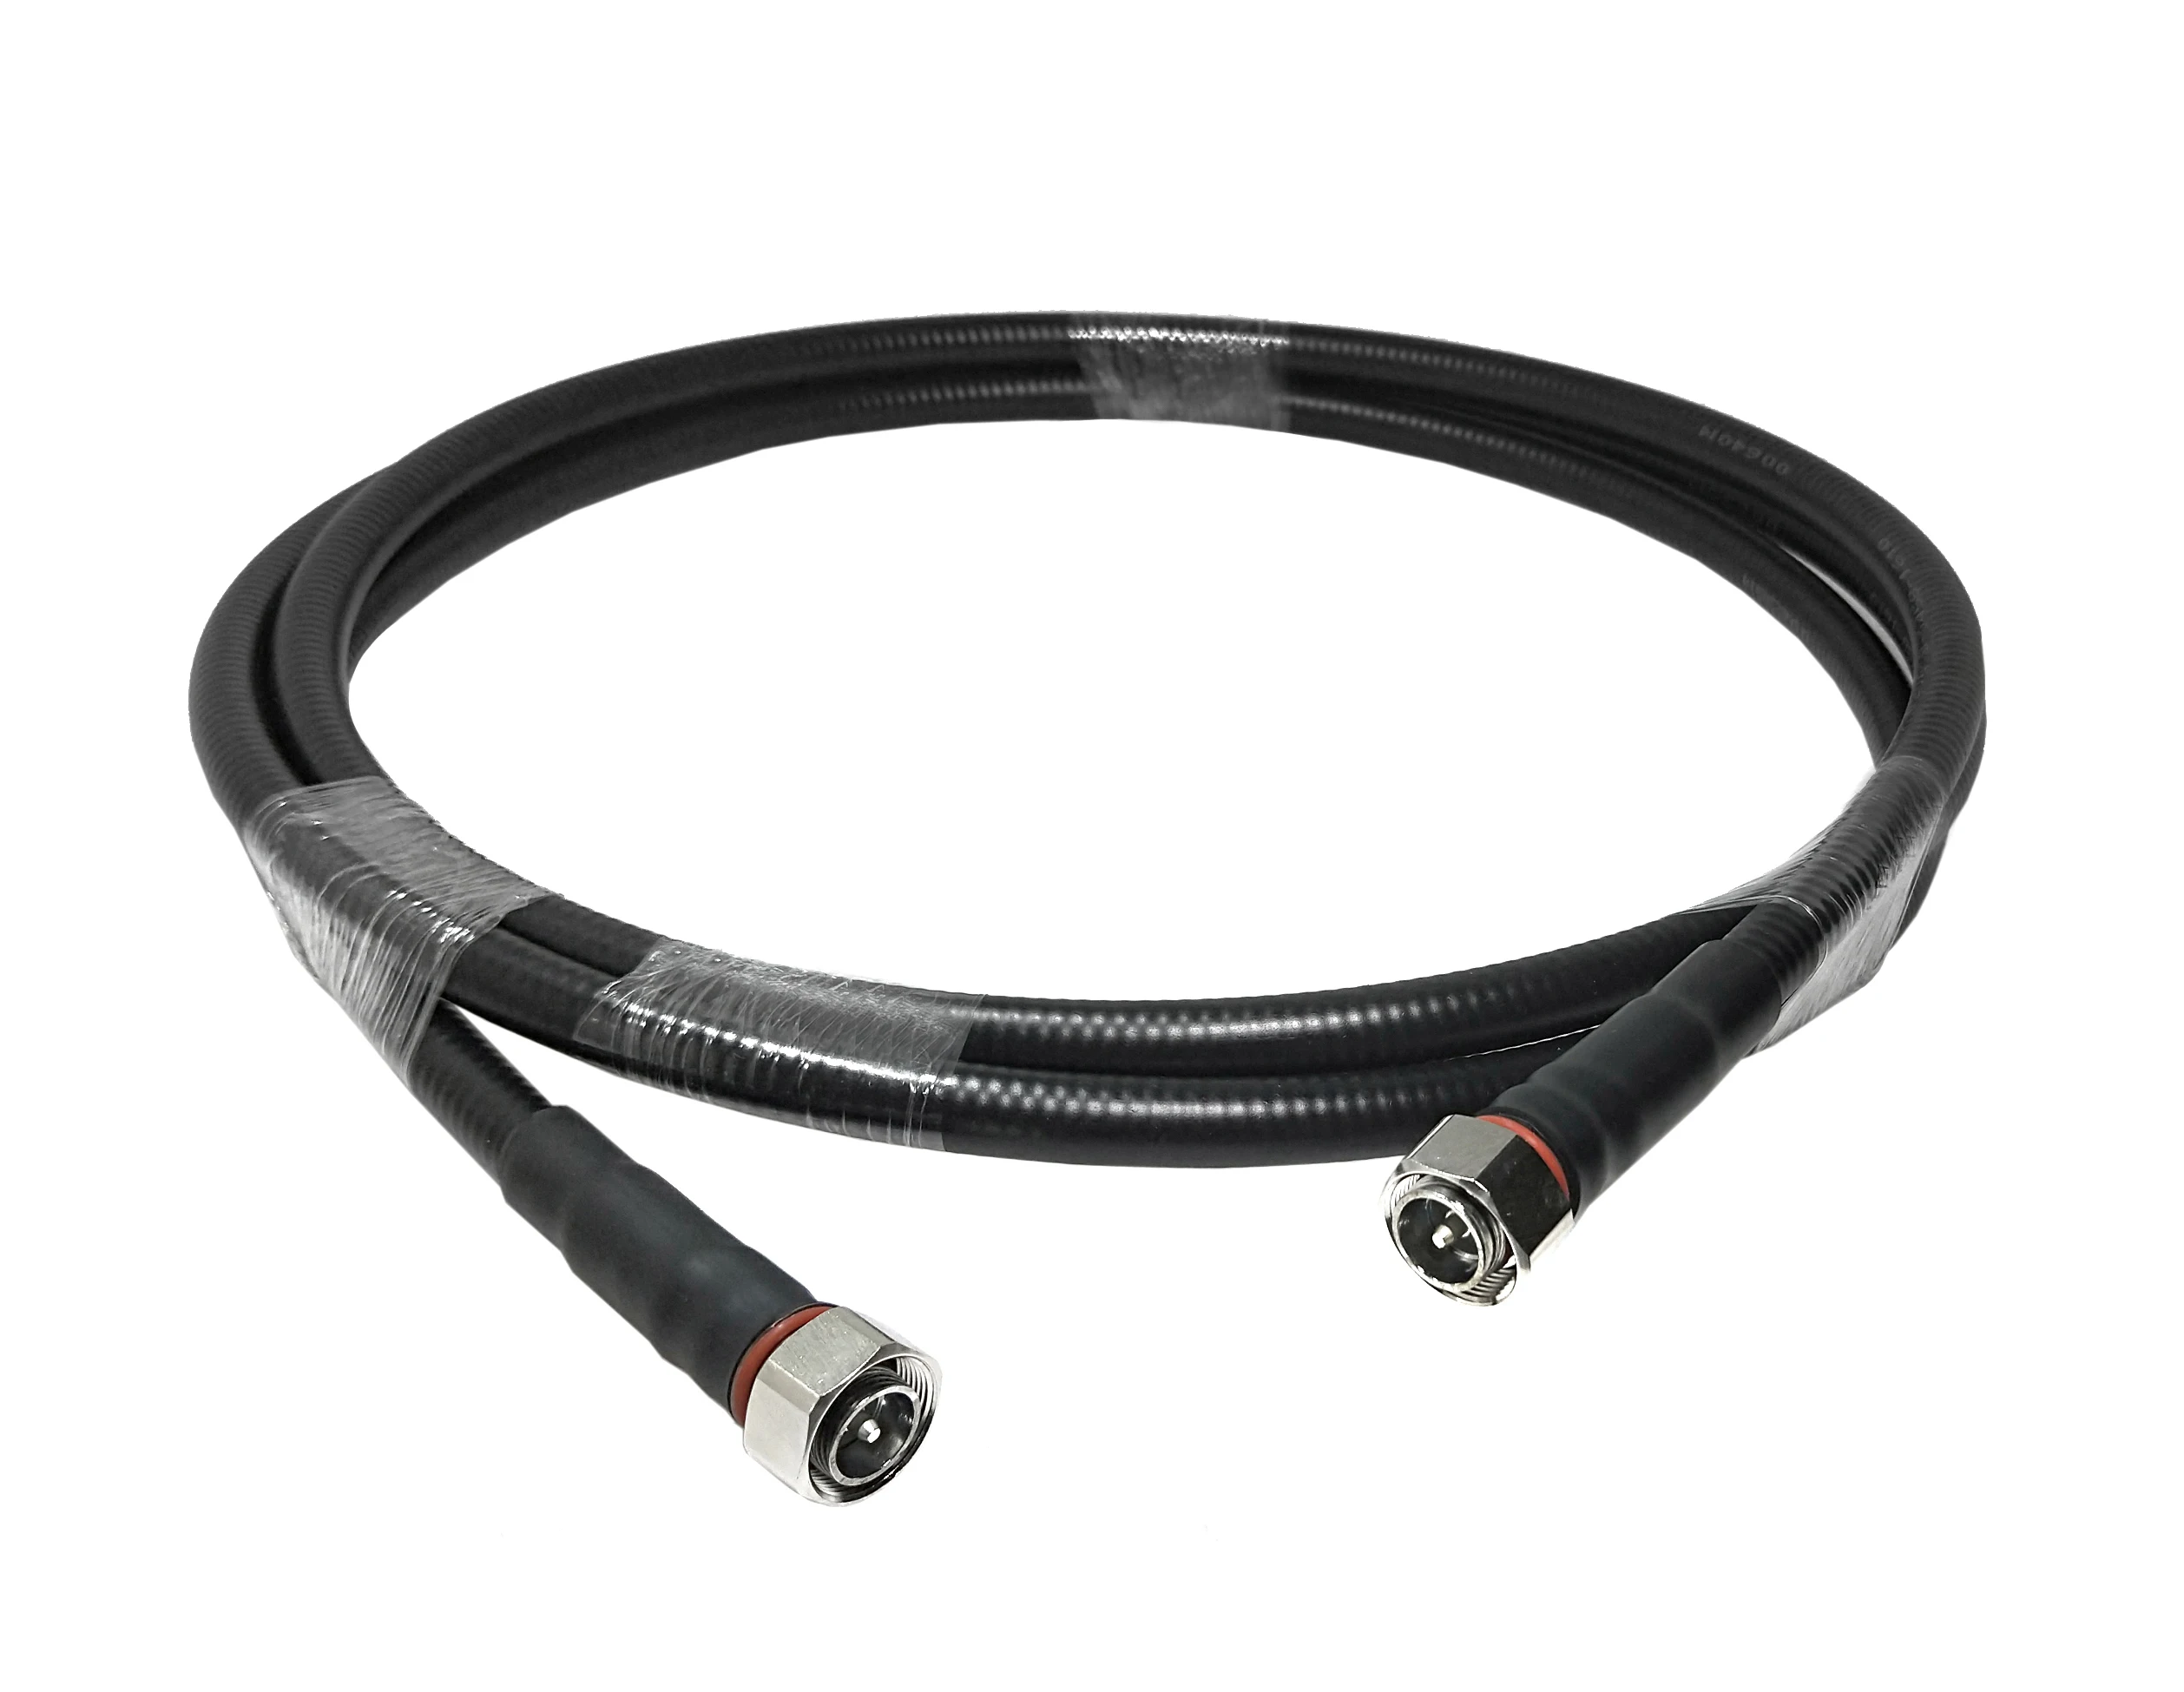 L20 4.3-10 male to 4.3/10 male 1/2" supersoft flexible 3m jumper cable assembly details